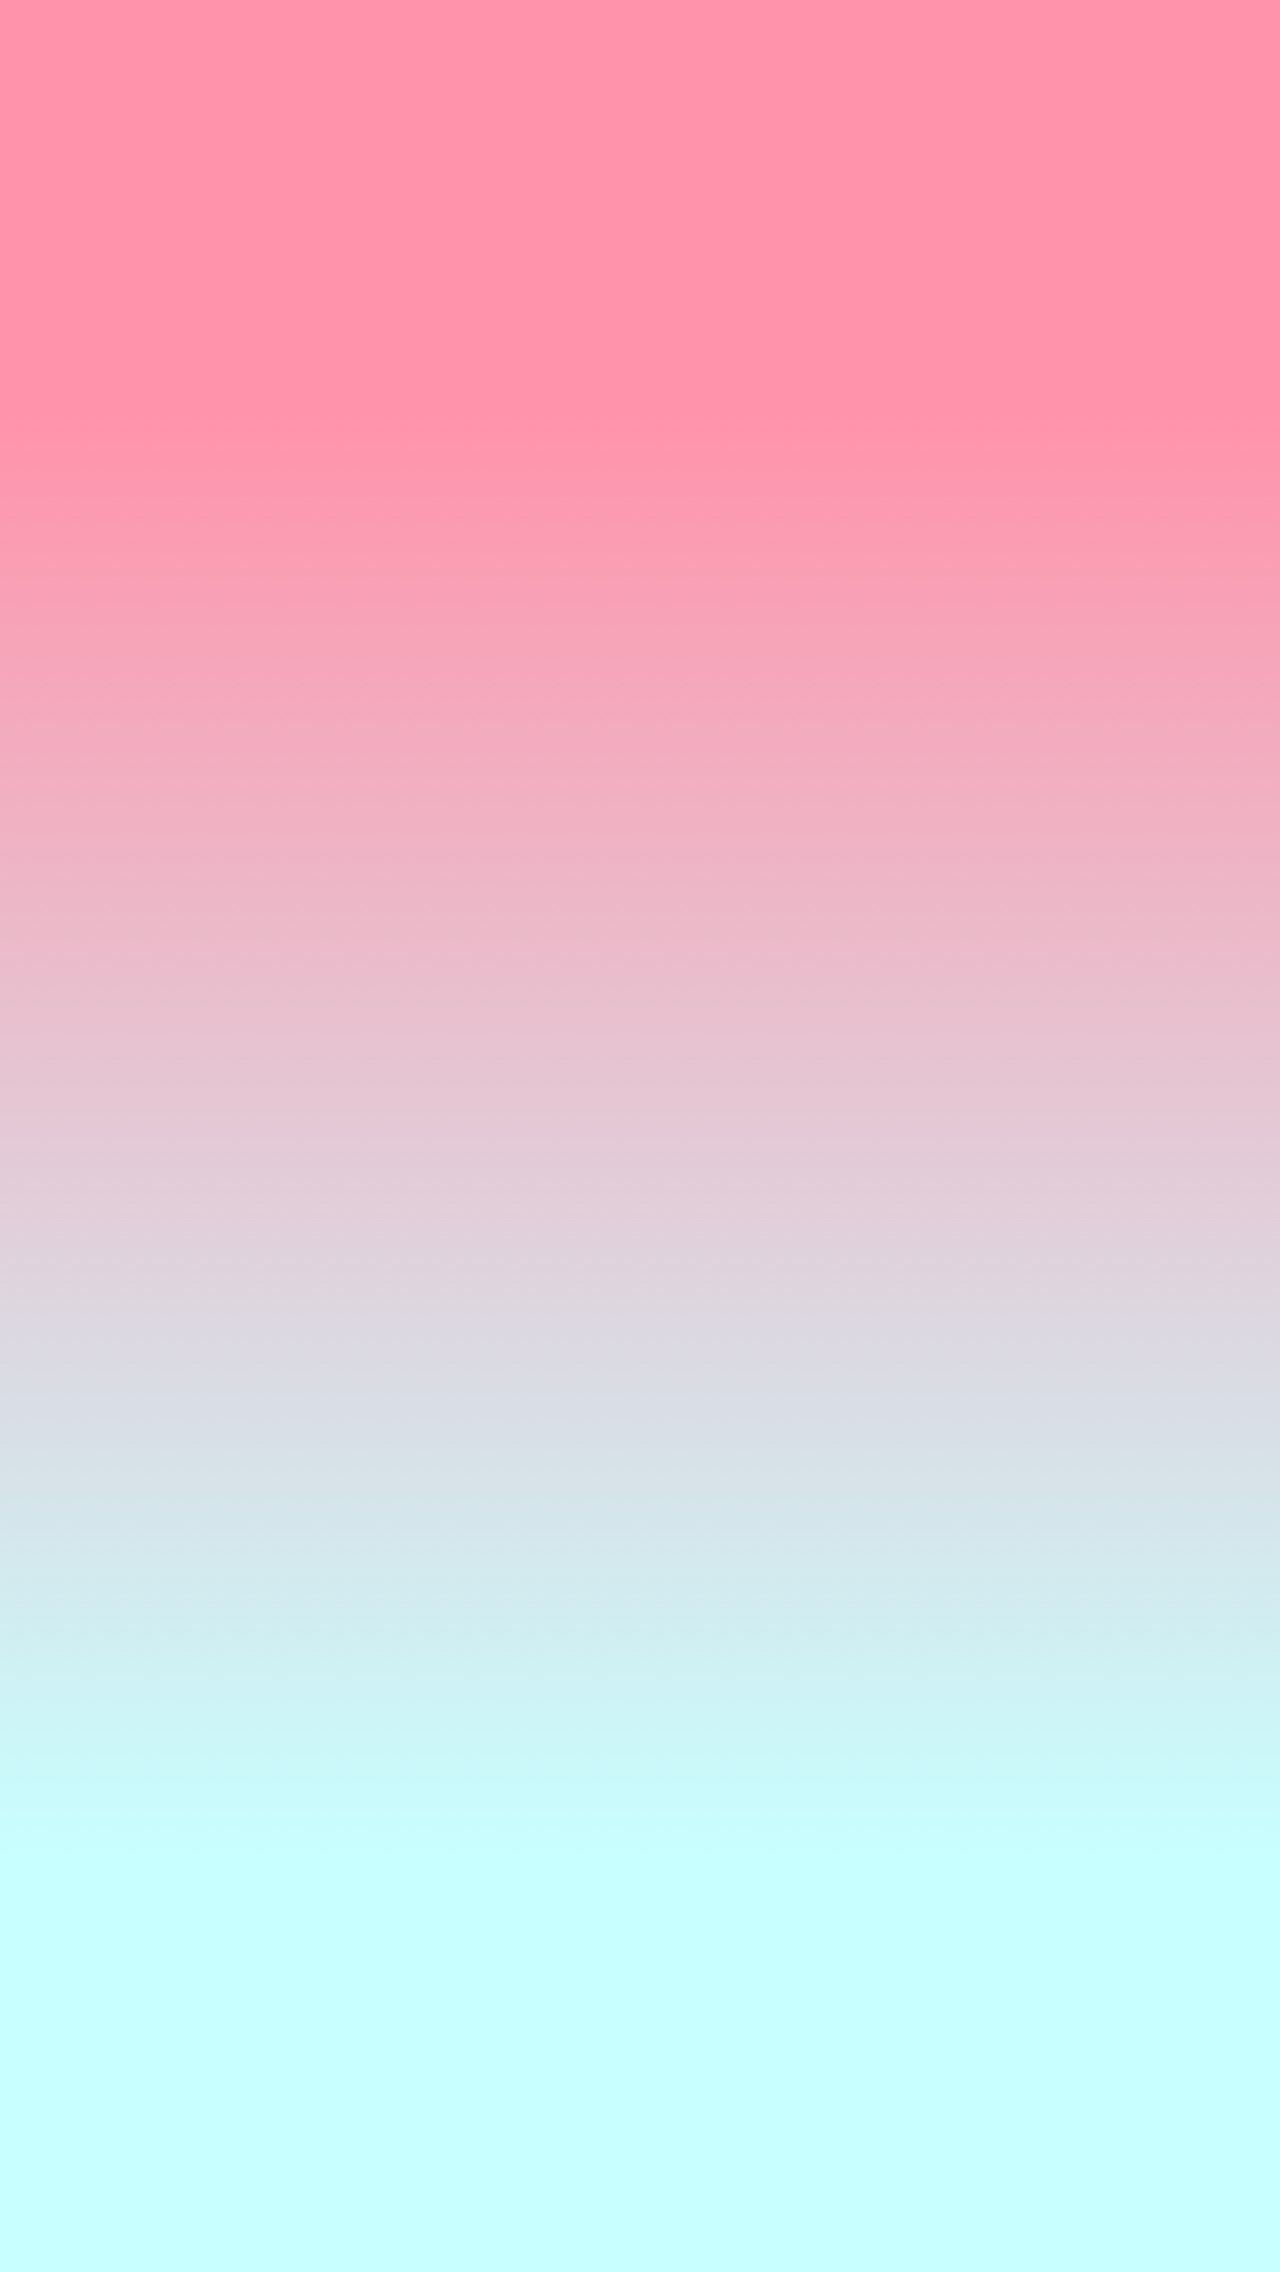 Pink Ombre Wallpaper Image For Your